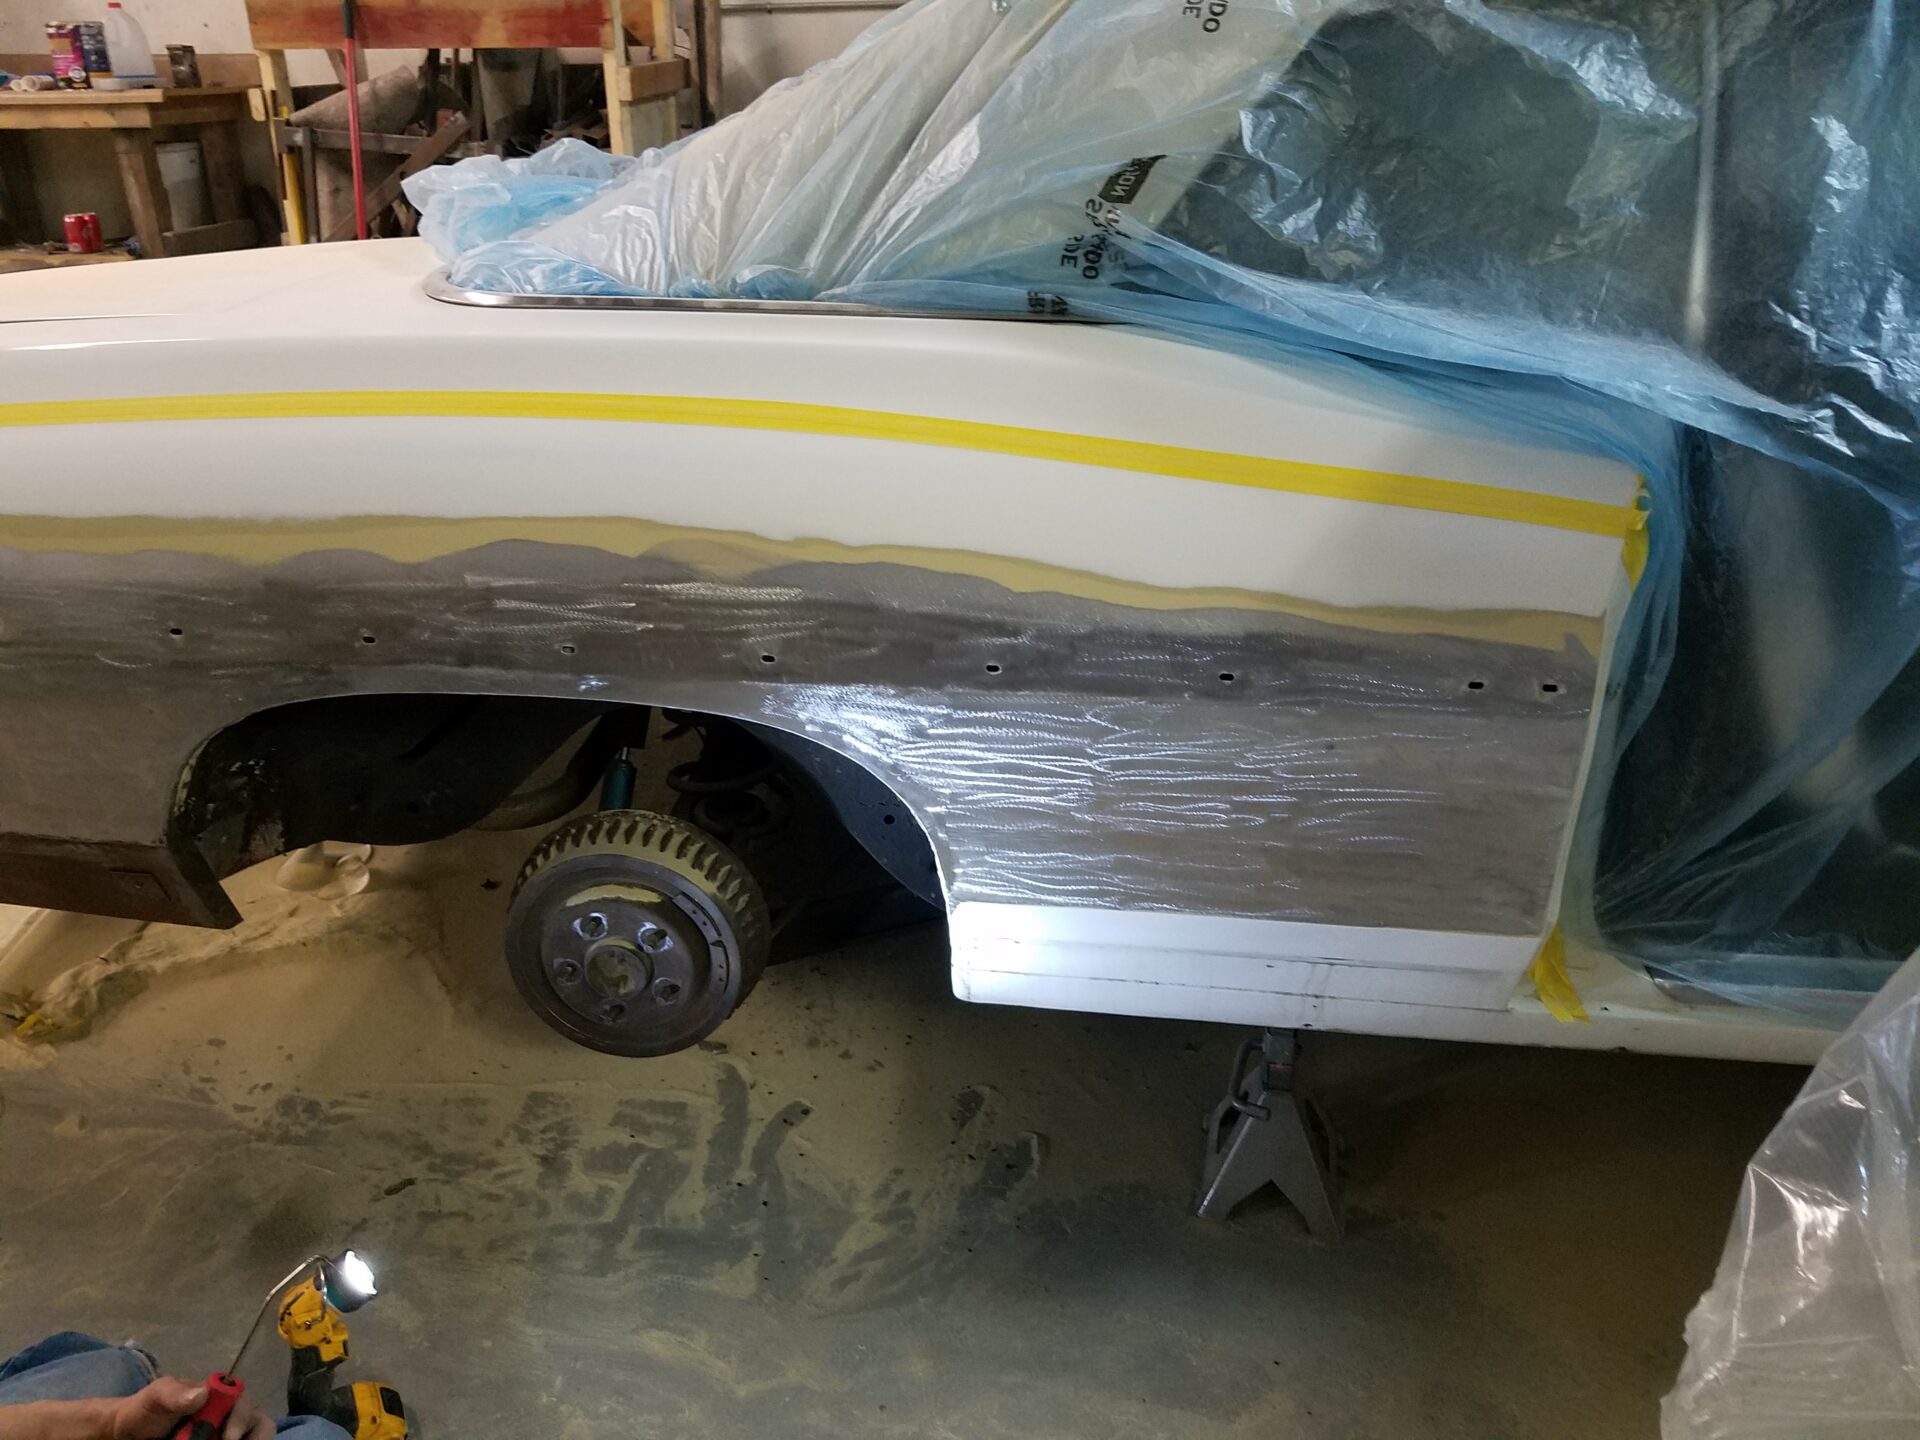 Removing the rusted and damaged part of the 1970 Pontiac Bonneville